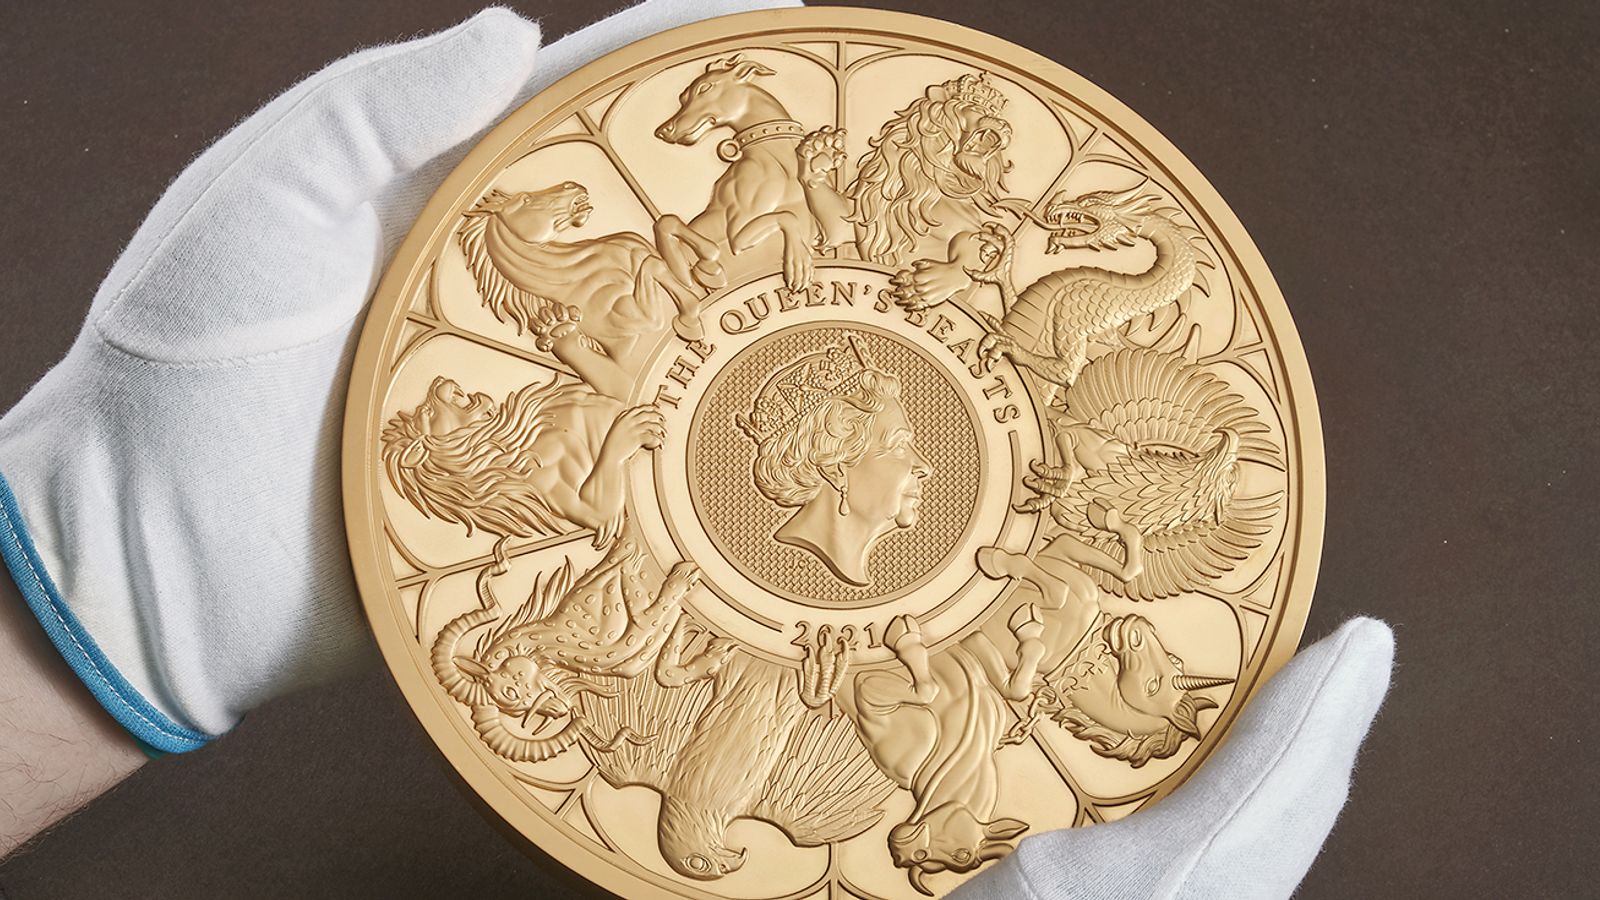 Biggest coin ever made in Royal Mint's 1,100 year history unveiled